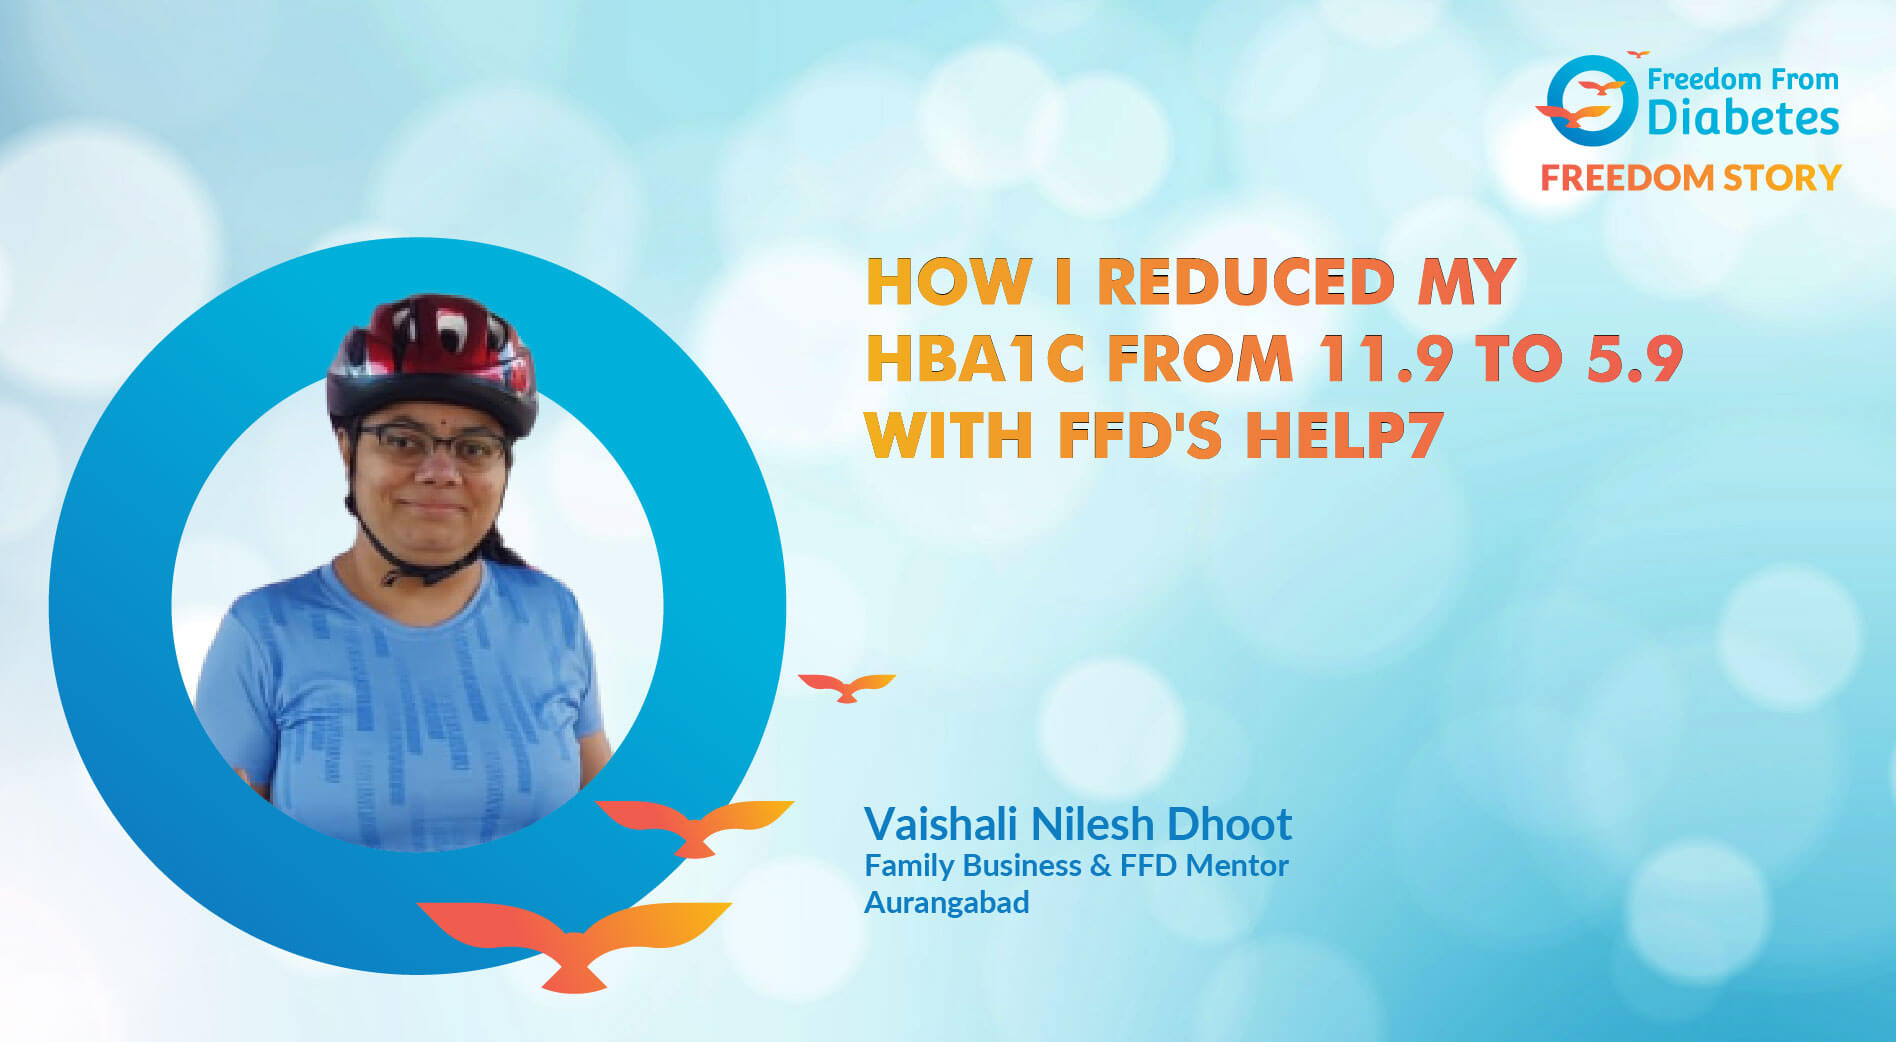 How I reduced my HbA1c from 11.9 to 5.9 with FFD's help